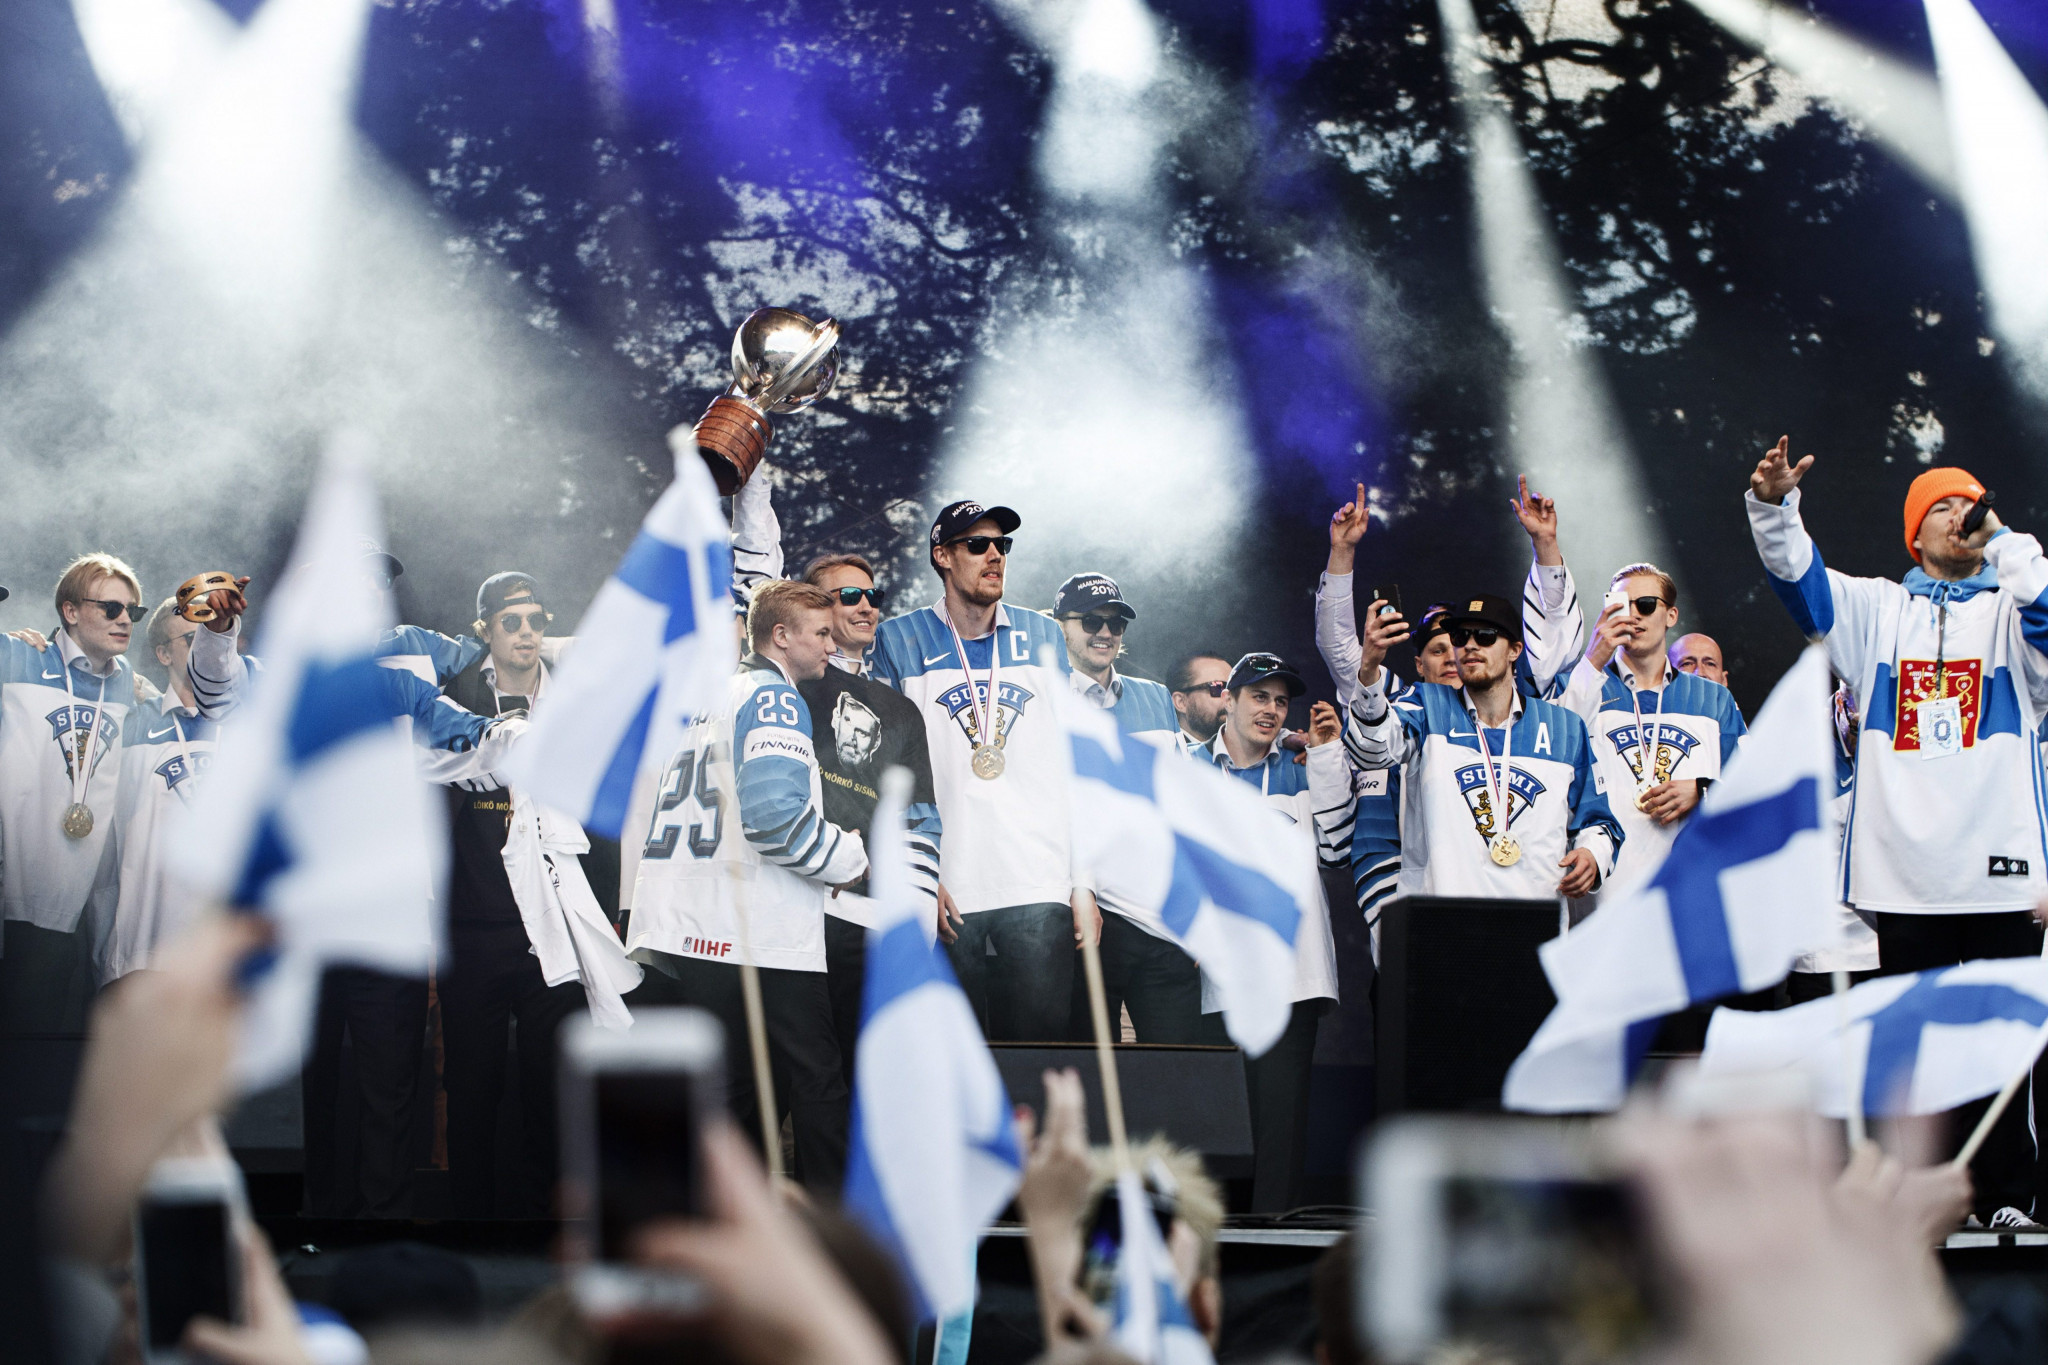 Finland claimed their first world title since 2011 with victory over Canada in this year's final ©Getty Images